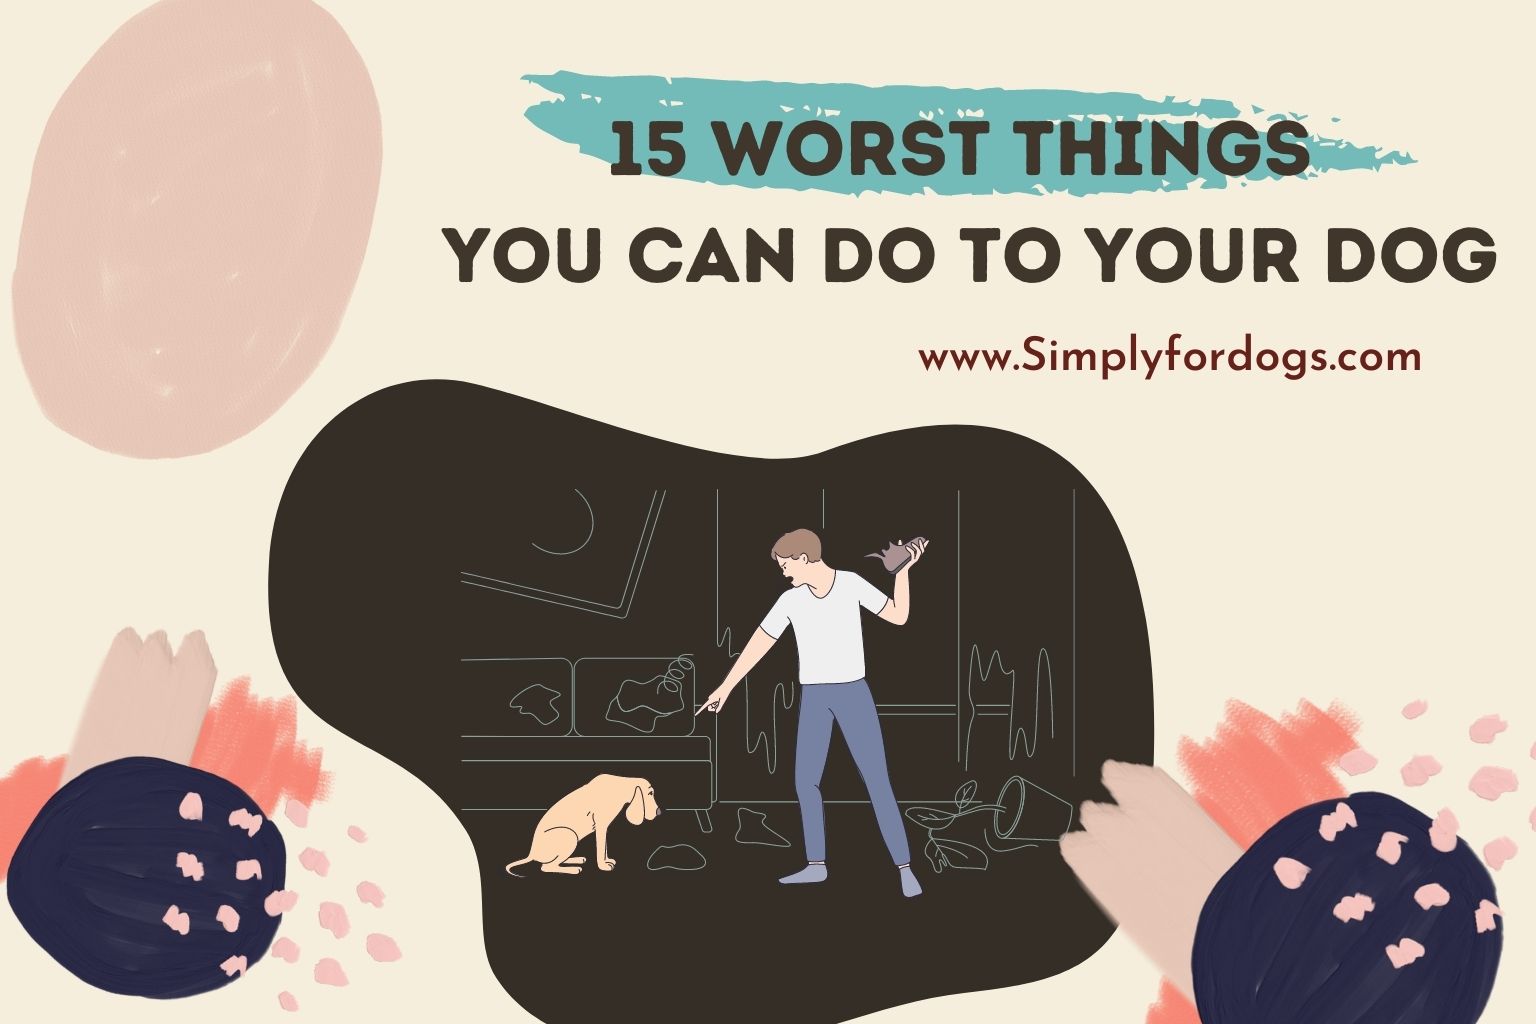 Worst-Things-You-Can-Do-to-Your-Dog